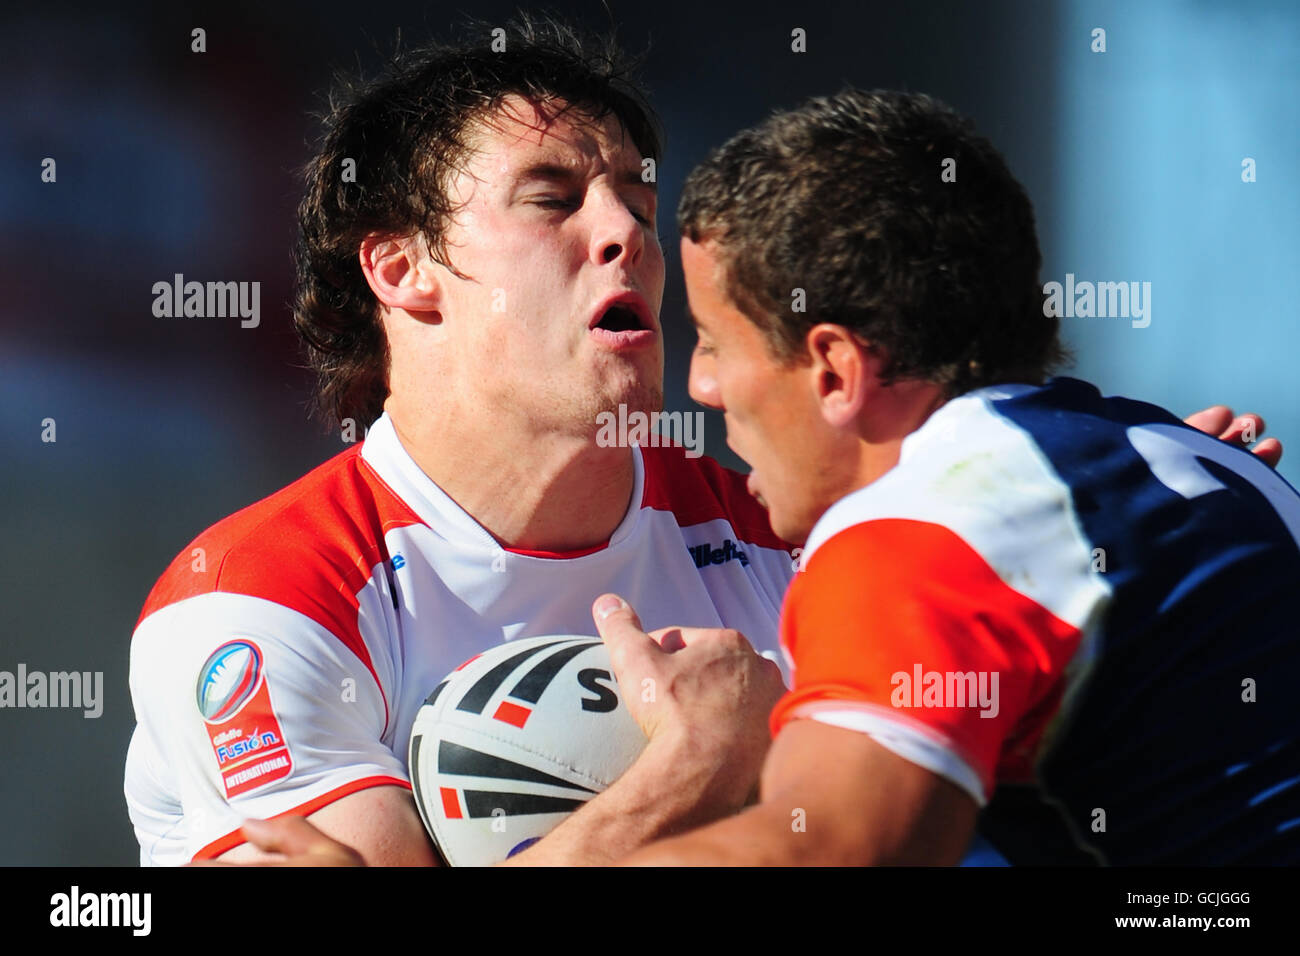 Rugby League - Gillette Fusion International - Inghilterra v Francia - Leigh Sports Village Foto Stock